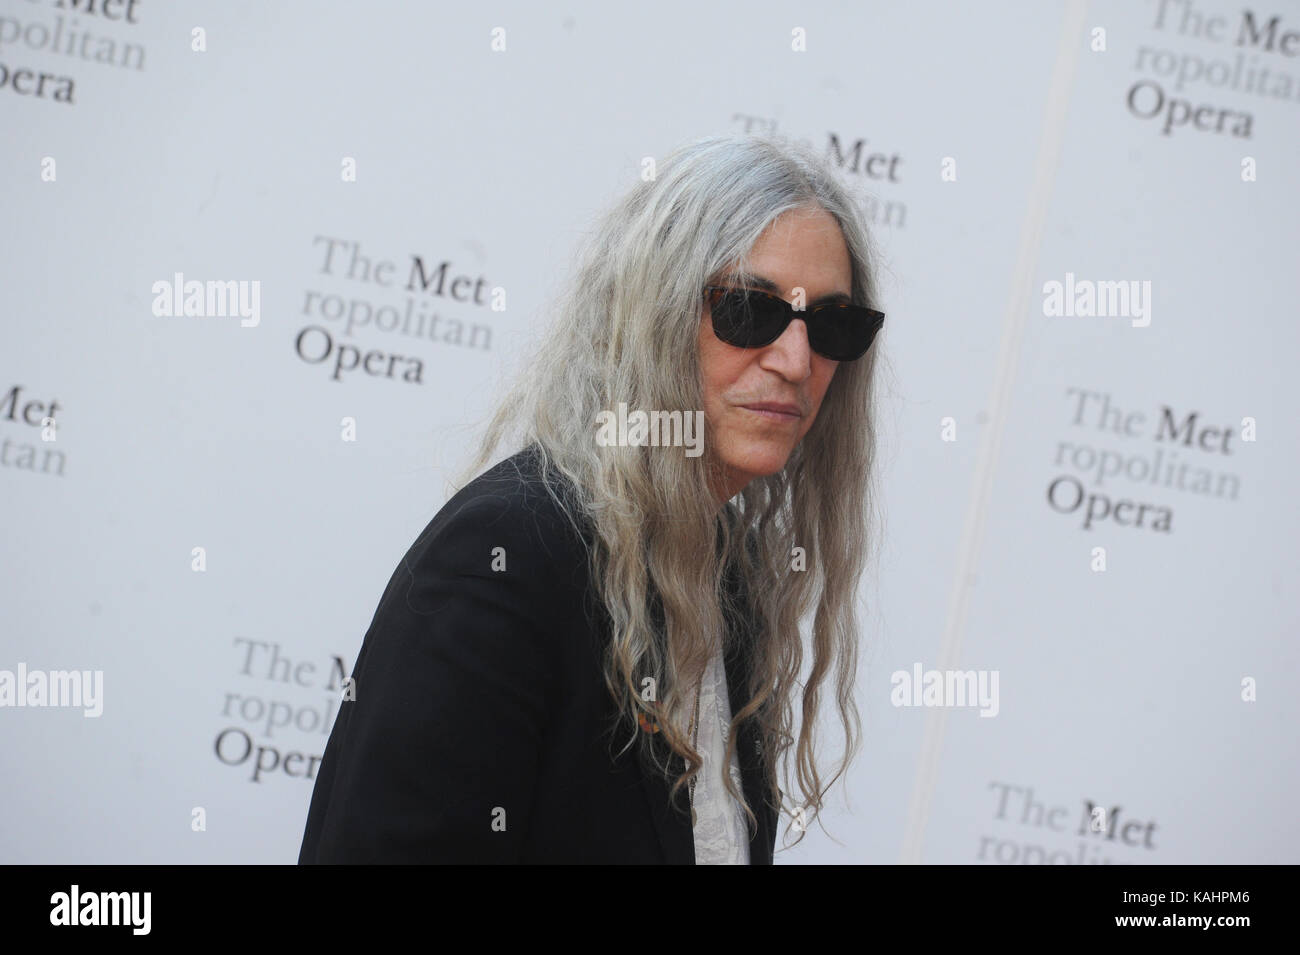 New York, NY, USA. 25th Sep, 2017. Patti Smith attends Metropolitan Opera Opening Night Gala at Lincoln Center on September 25, 2017 in New York City. People: Patti Smith Transmission Ref: MNC1 Must call if interested Michael Storms Storms Media Group Inc. 305-632-3400 - Cell 305-513-5783 - Fax MikeStorm Credit: Aol.Com Www.Storms Media Group.Com/Alamy Live News Stock Photo